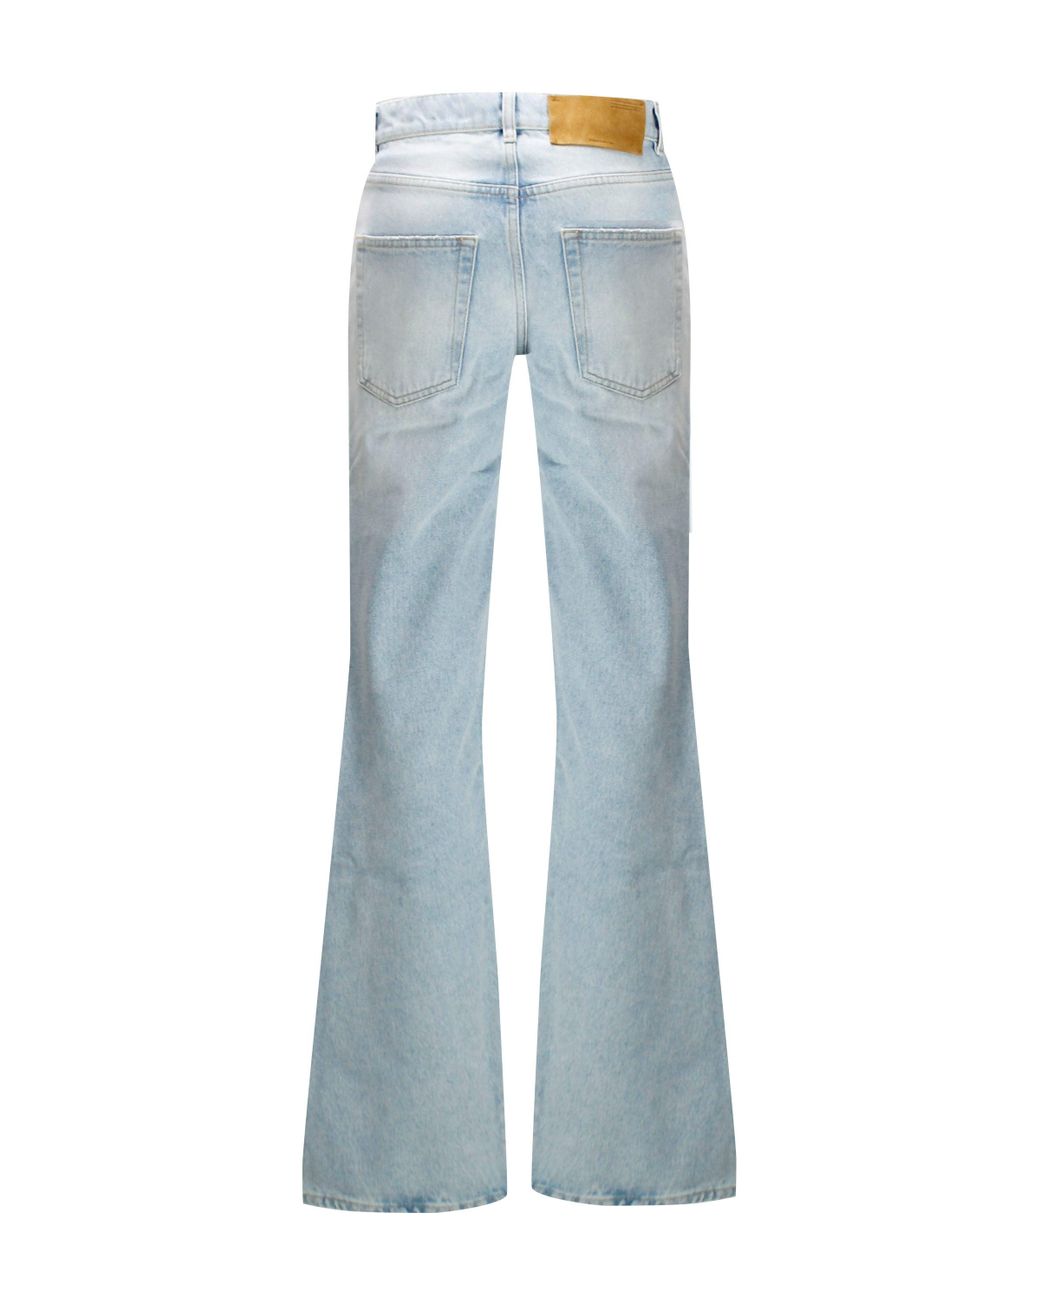 Off-White c/o Virgil Abloh Bleach Baby baggy Flared Jeans in Blue